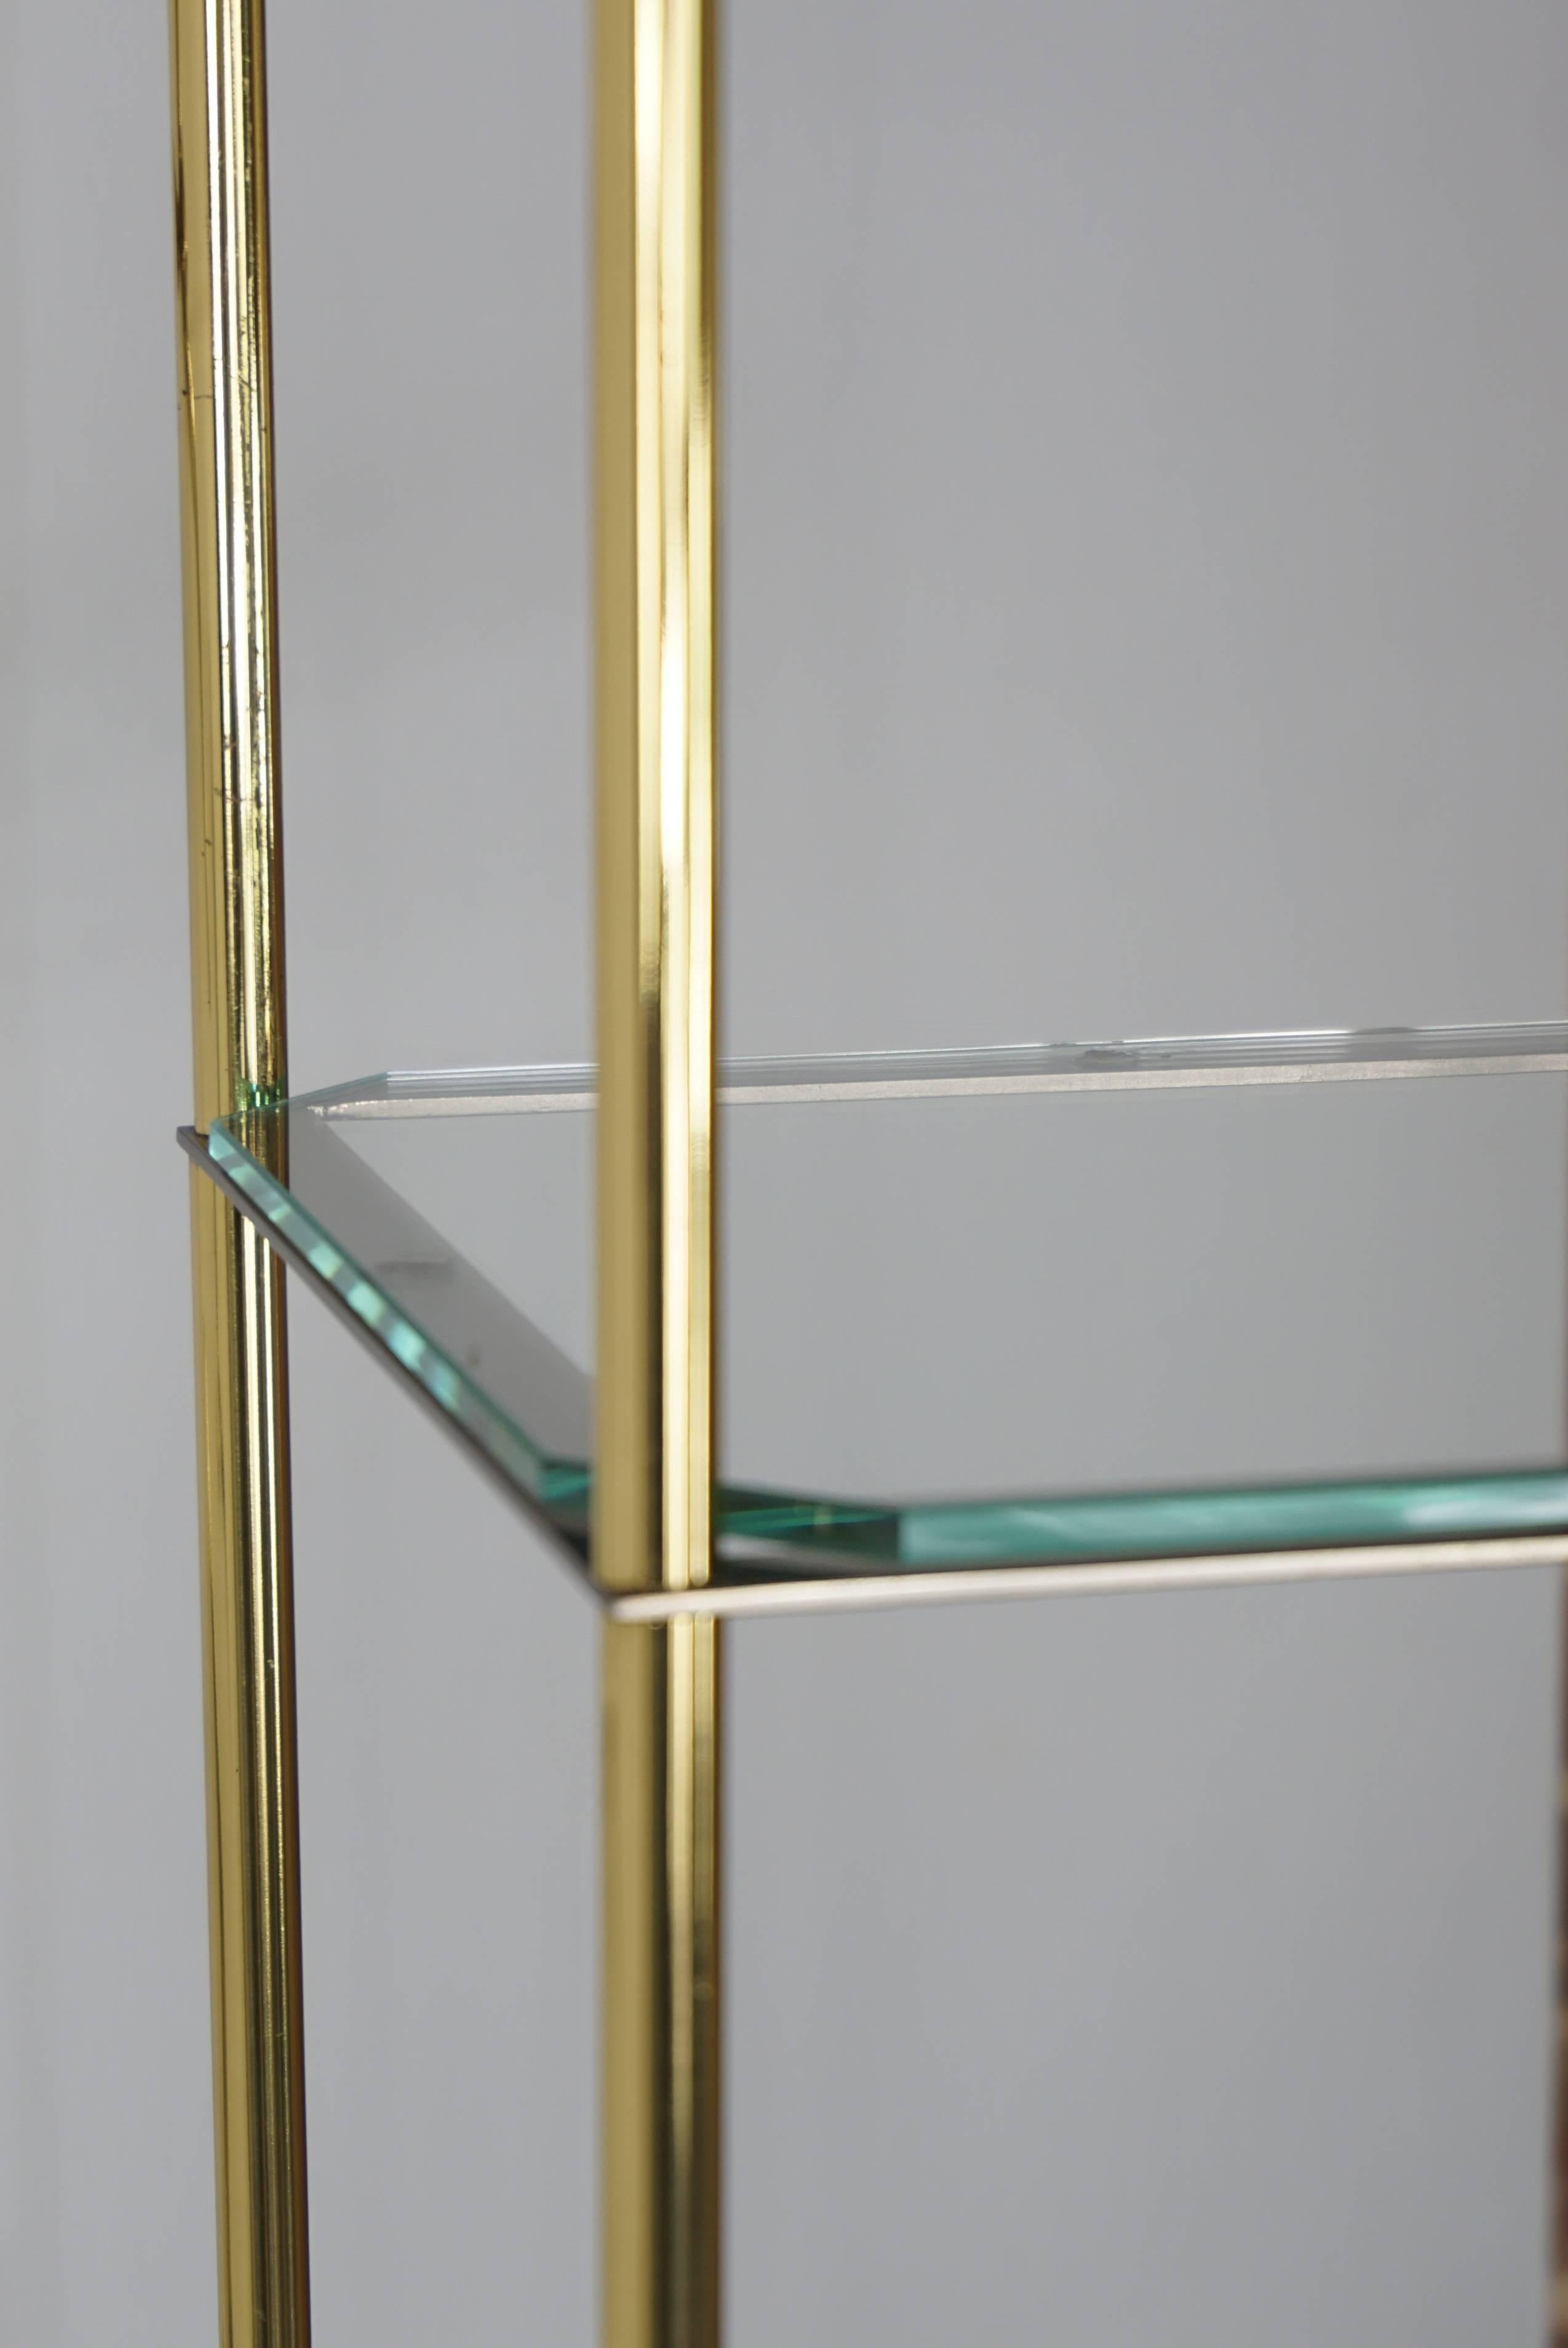 Hollywood Regency Design Glass Metal and Brass Floor Lamp with Shelves